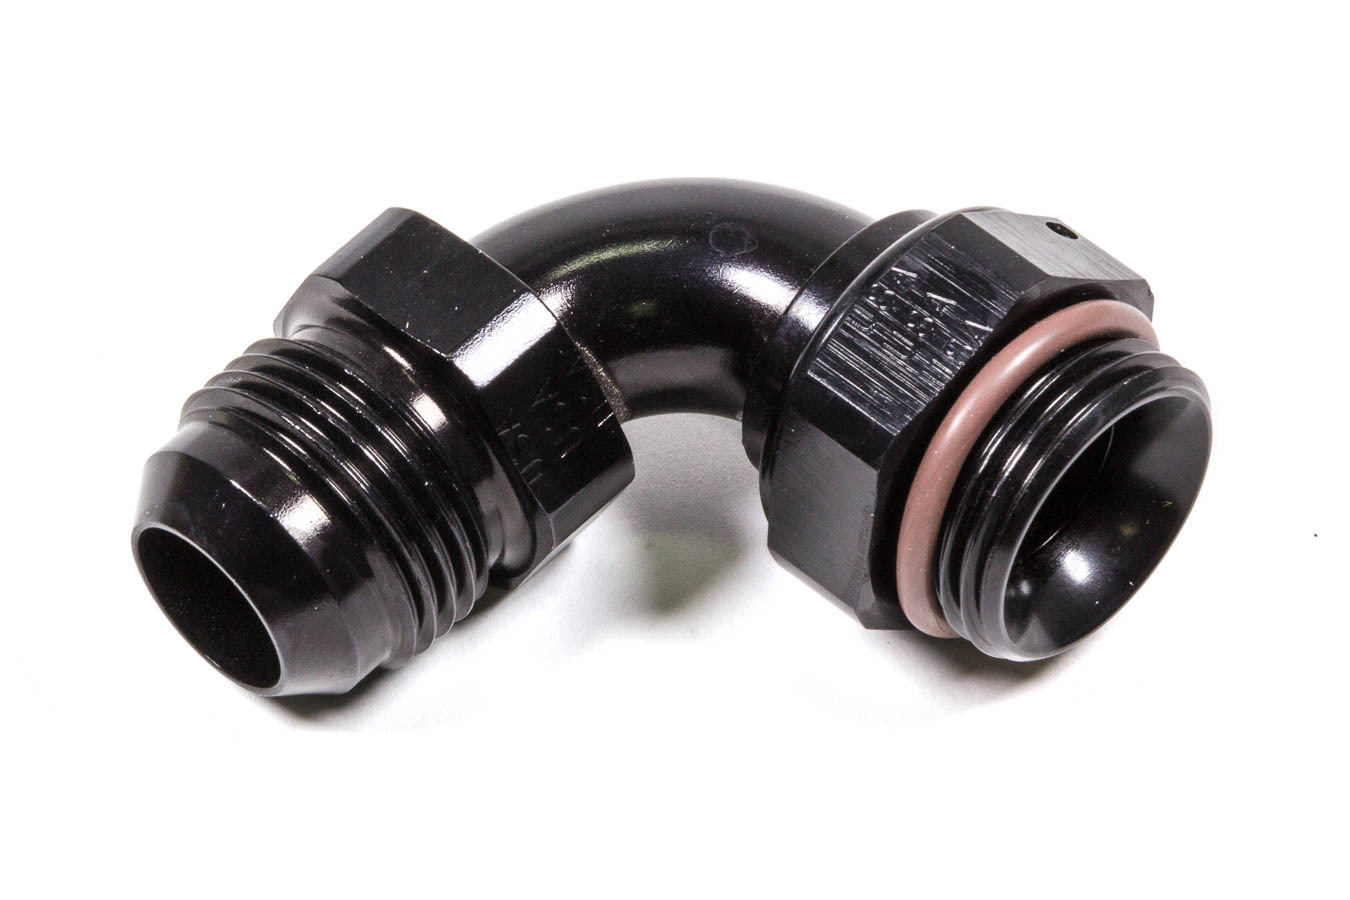 XRP 959012 Fitting, Adapter, 90 Degree, 12 AN Male to 12 AN Male O-Ring, Aluminum, Black Anodized, Each